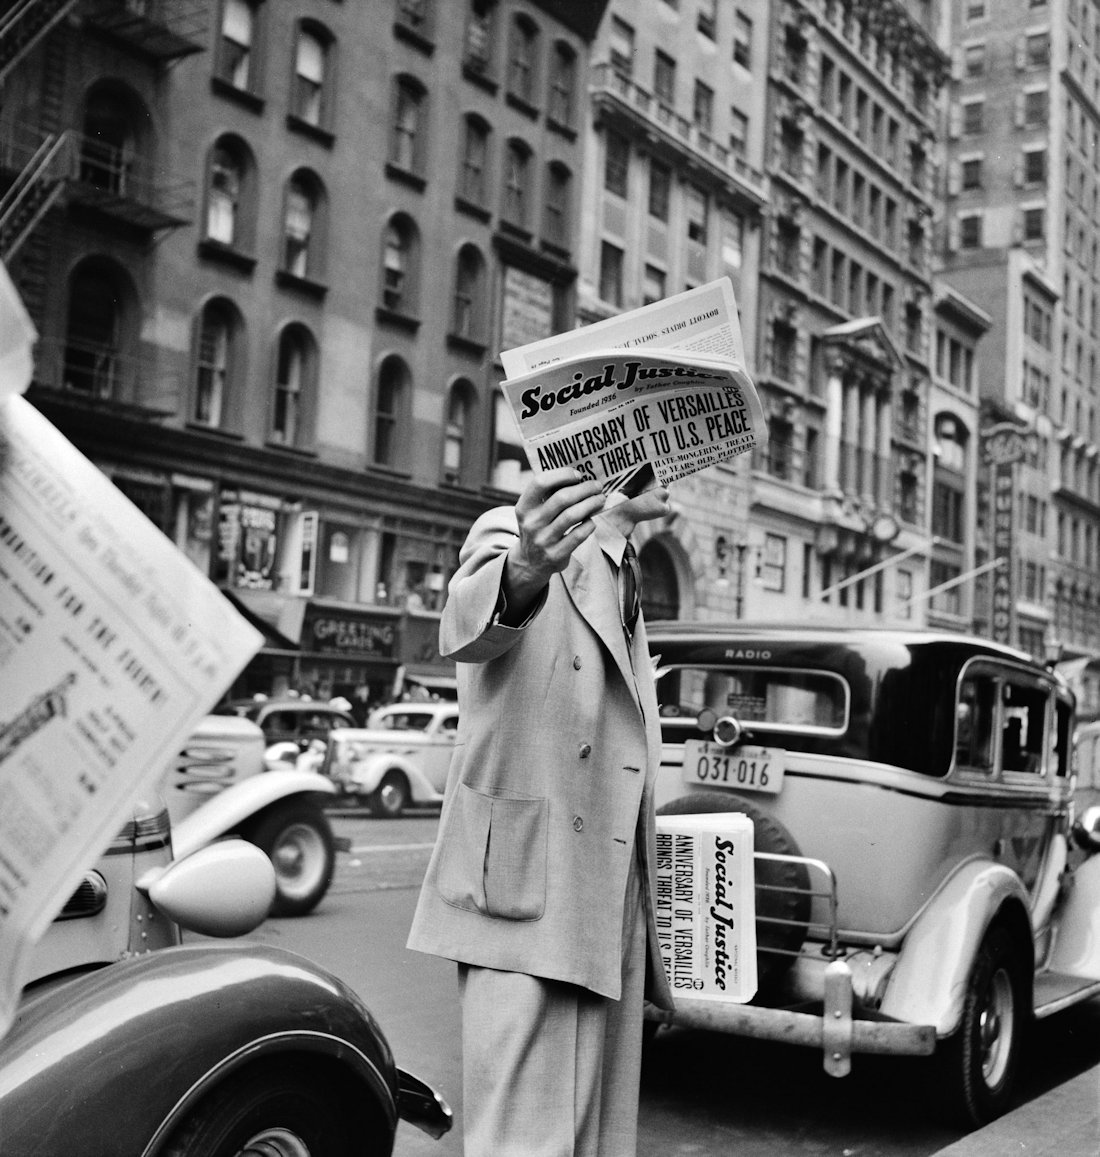 Social Justice newspaper sold on a street corner in New York City in 1939.